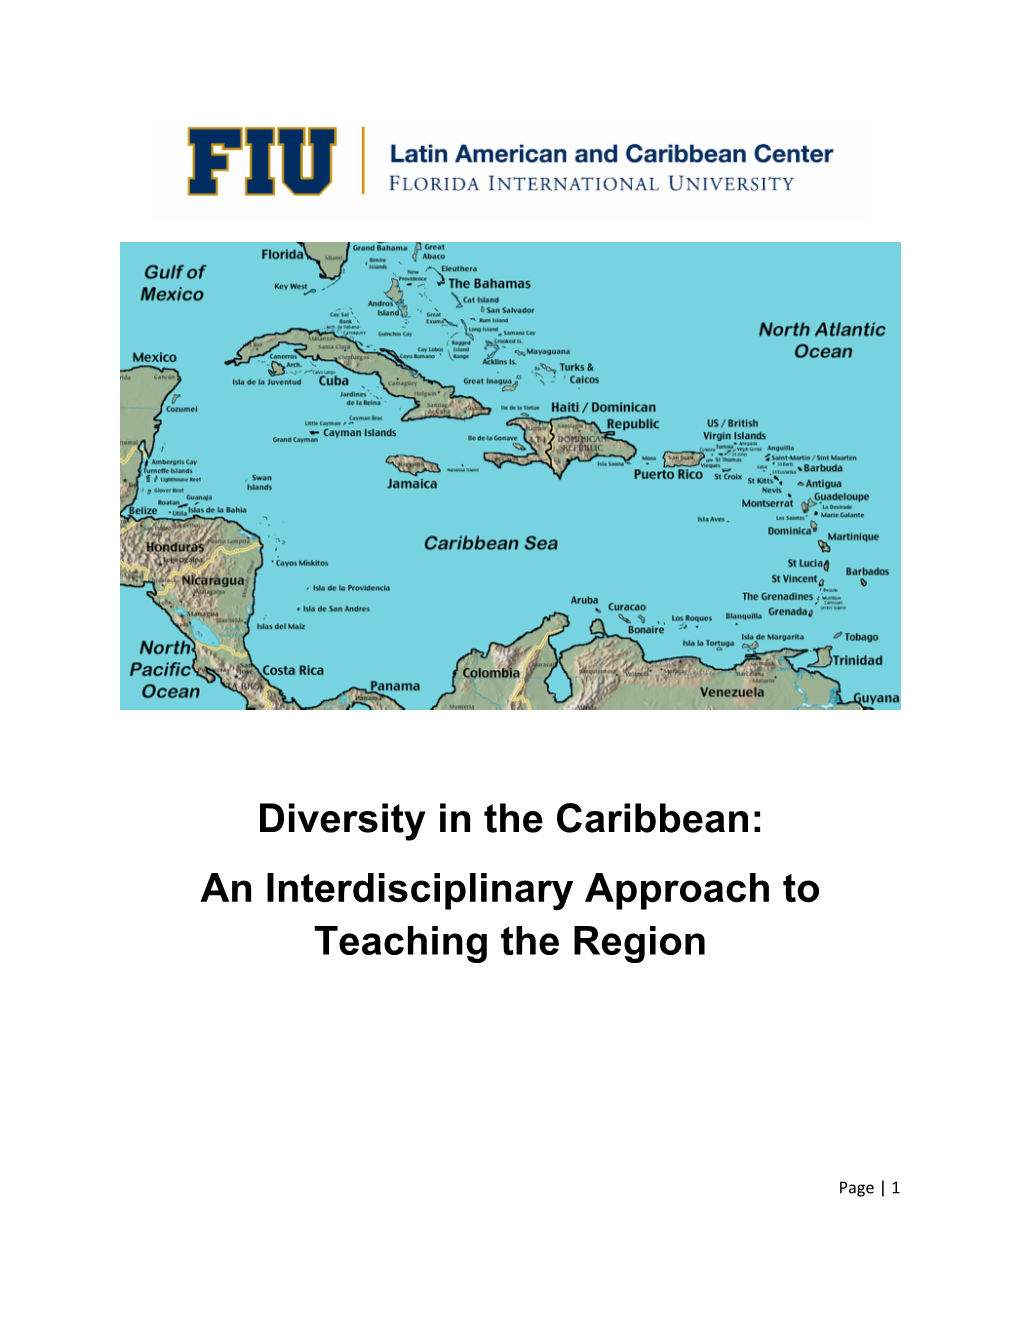 Diversity in the Caribbean: an Interdisciplinary Approach to Teaching the Region